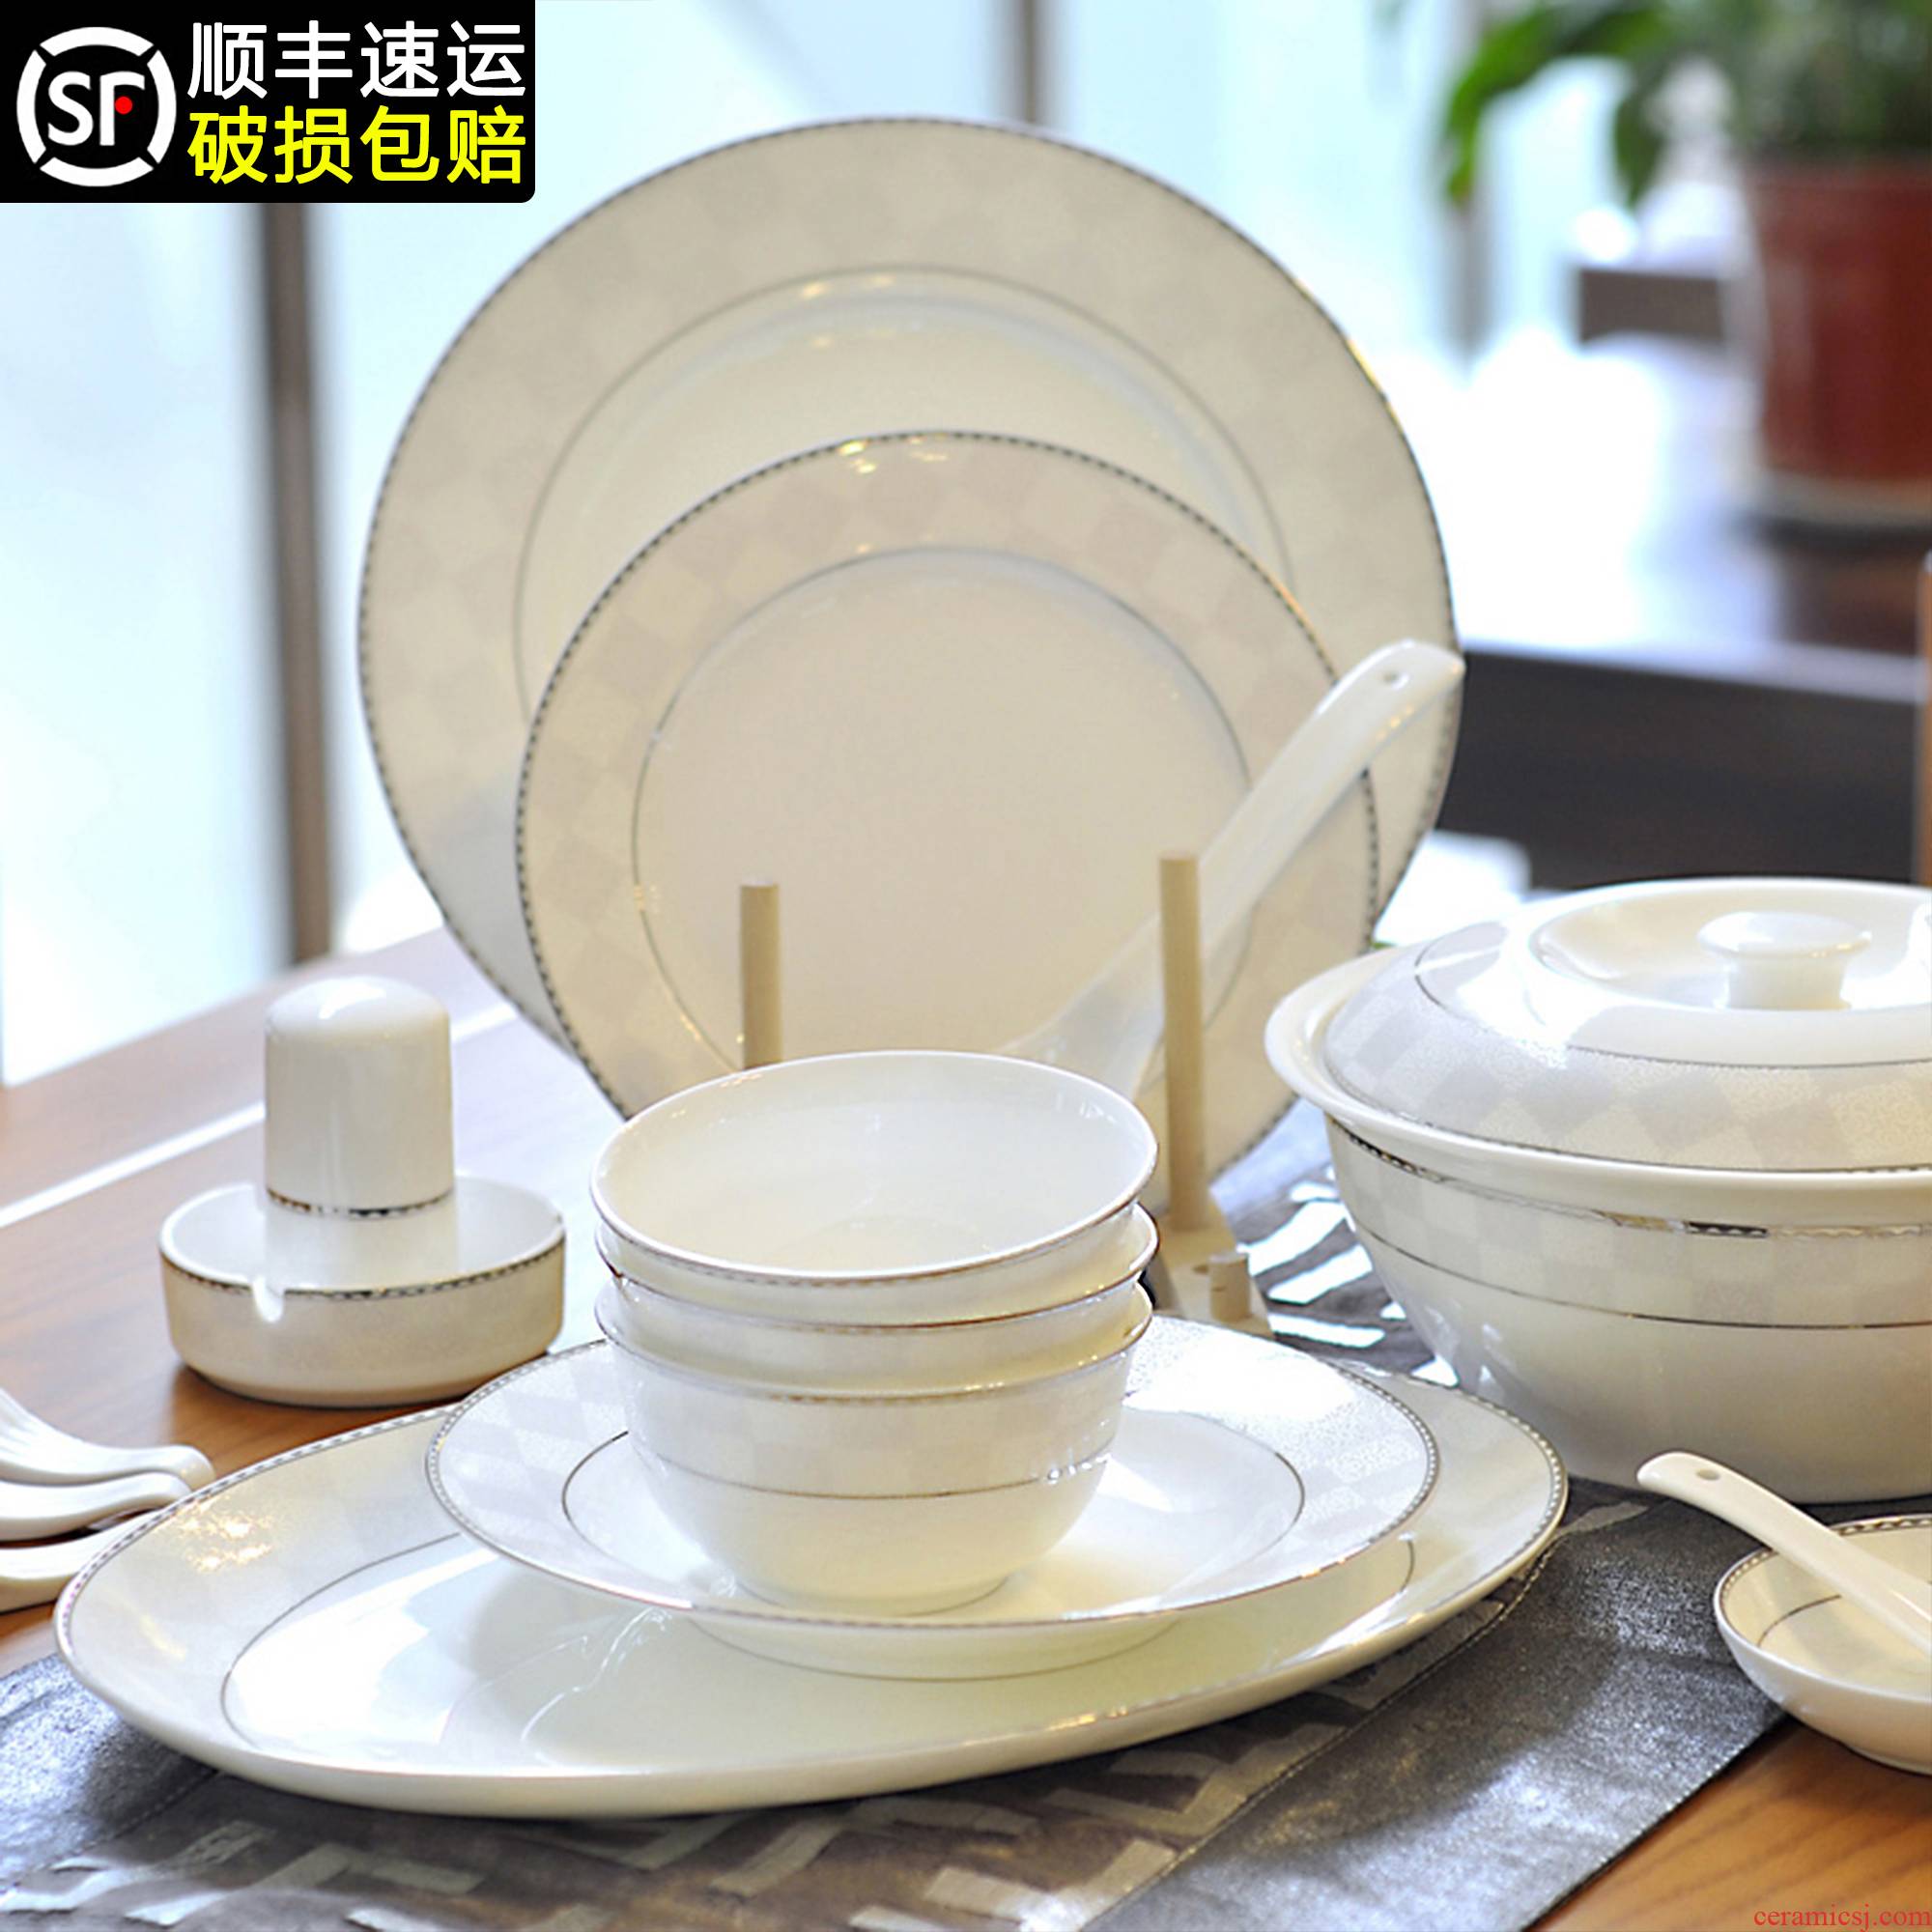 Jingdezhen ceramic tableware Chinese dishes suit household light and decoration plate chopsticks Korean high - grade ceramics from the high level of appearance